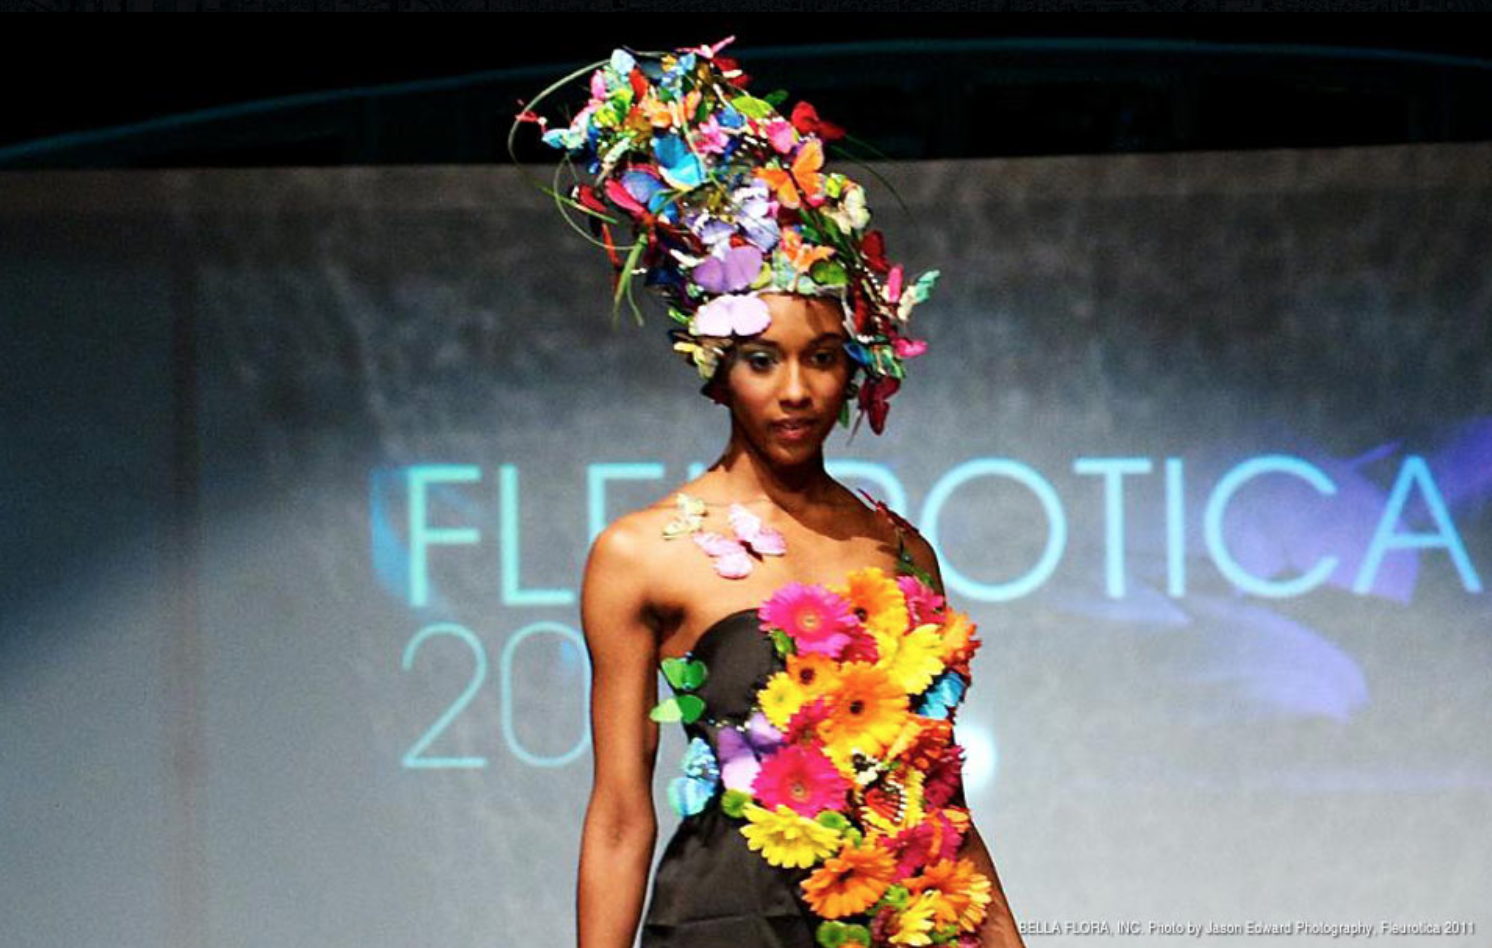 Flowers, Food and Fashion at Evening in Bloom featuring FLEUROTICA lead image